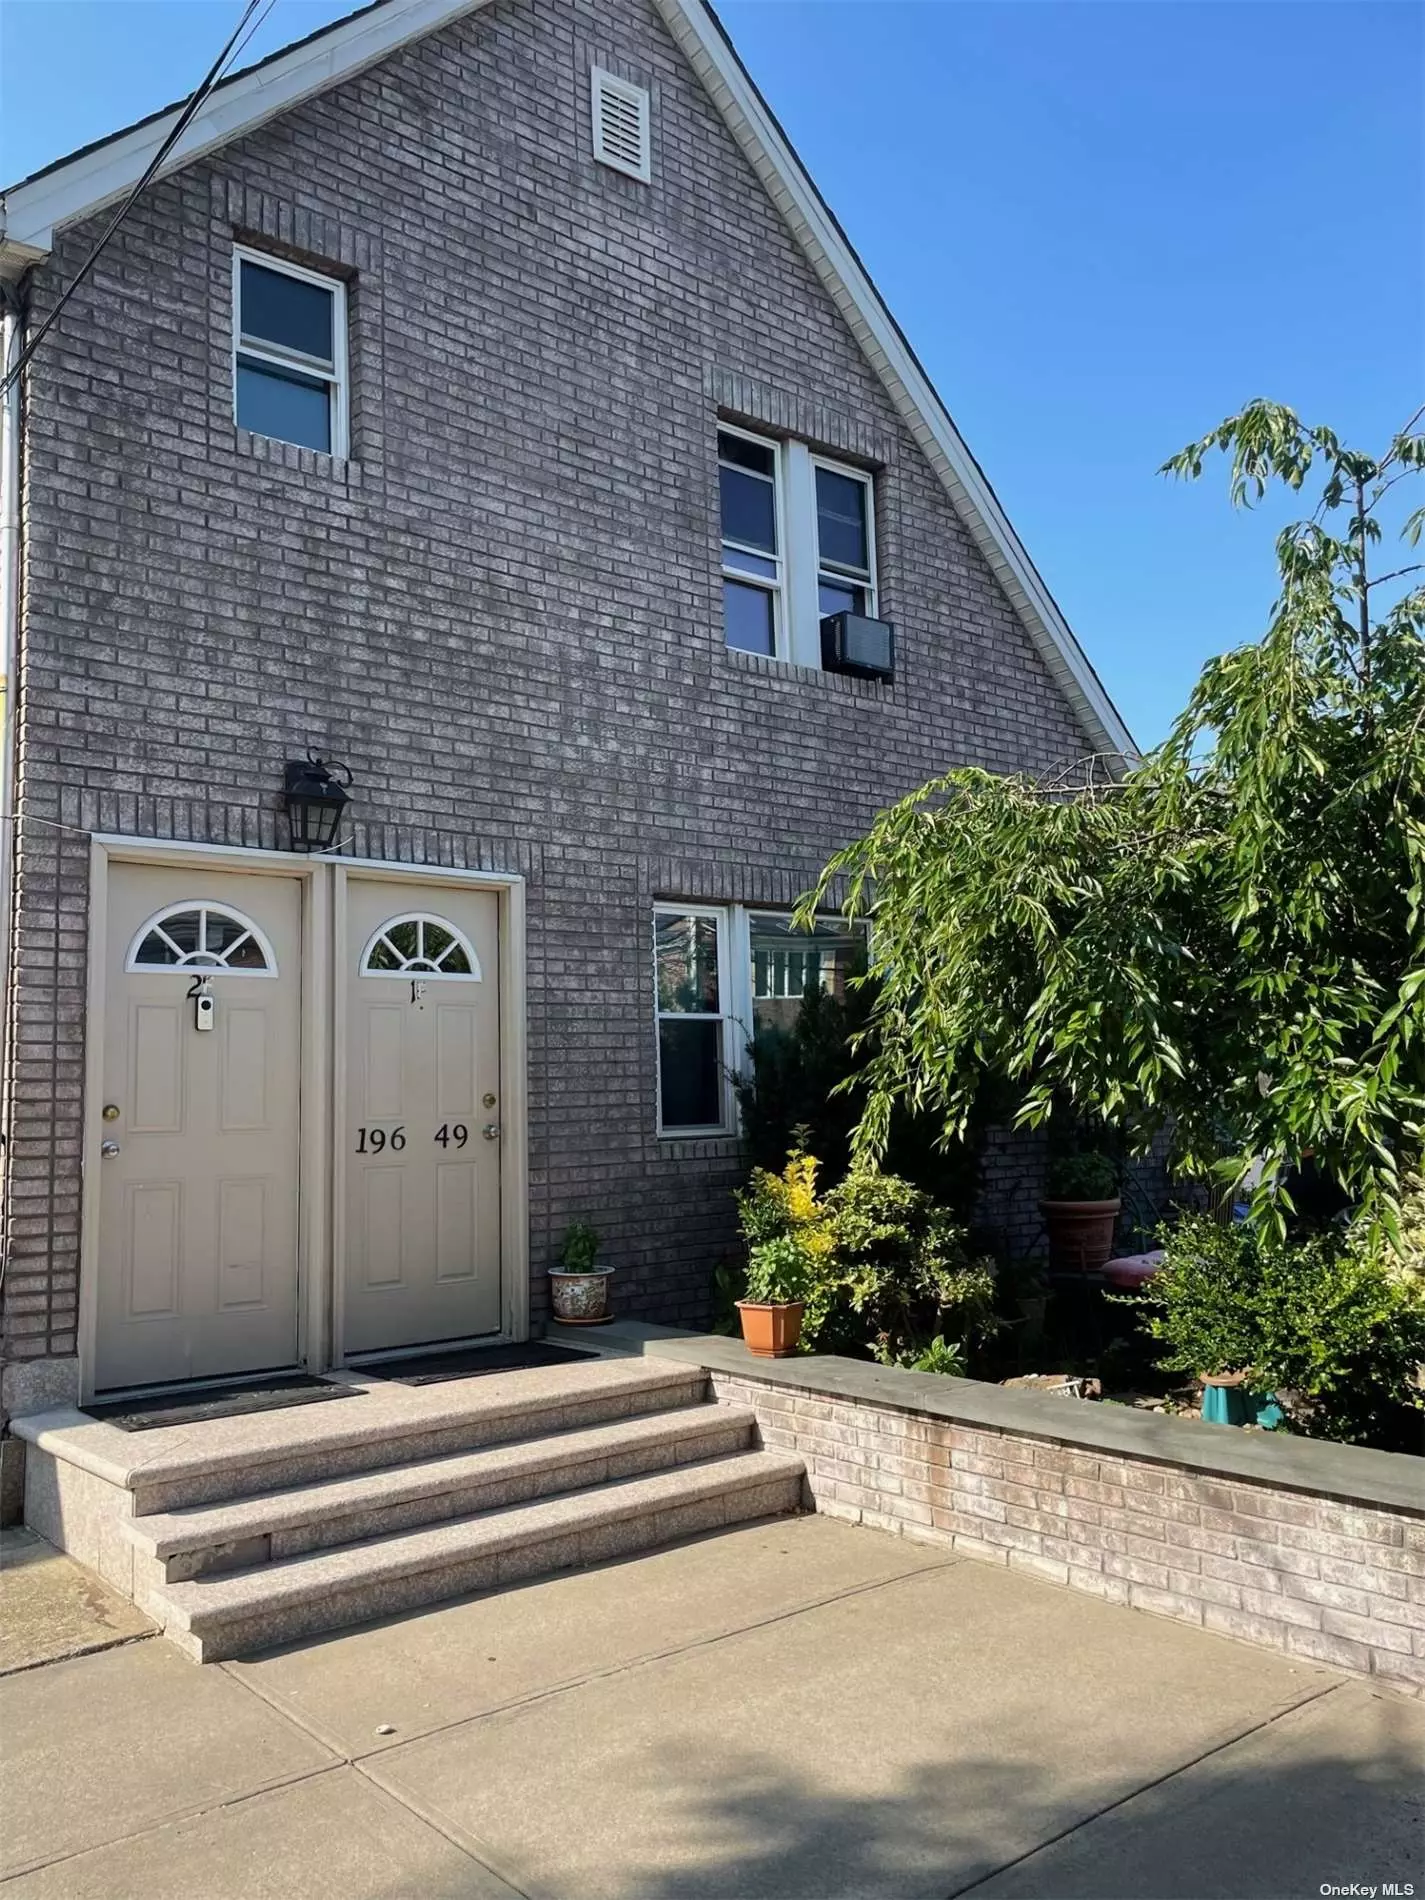 Updated huge 4700 interior sqf detached 4 family near Auburndale Train. near Northern and Francis Lewis Blvd.  yearly income is over $120, 000. 4 car driveway. New brick exterior and new roof, new windows. One of the unit is brand new. Well maintained property. Southern exposure..